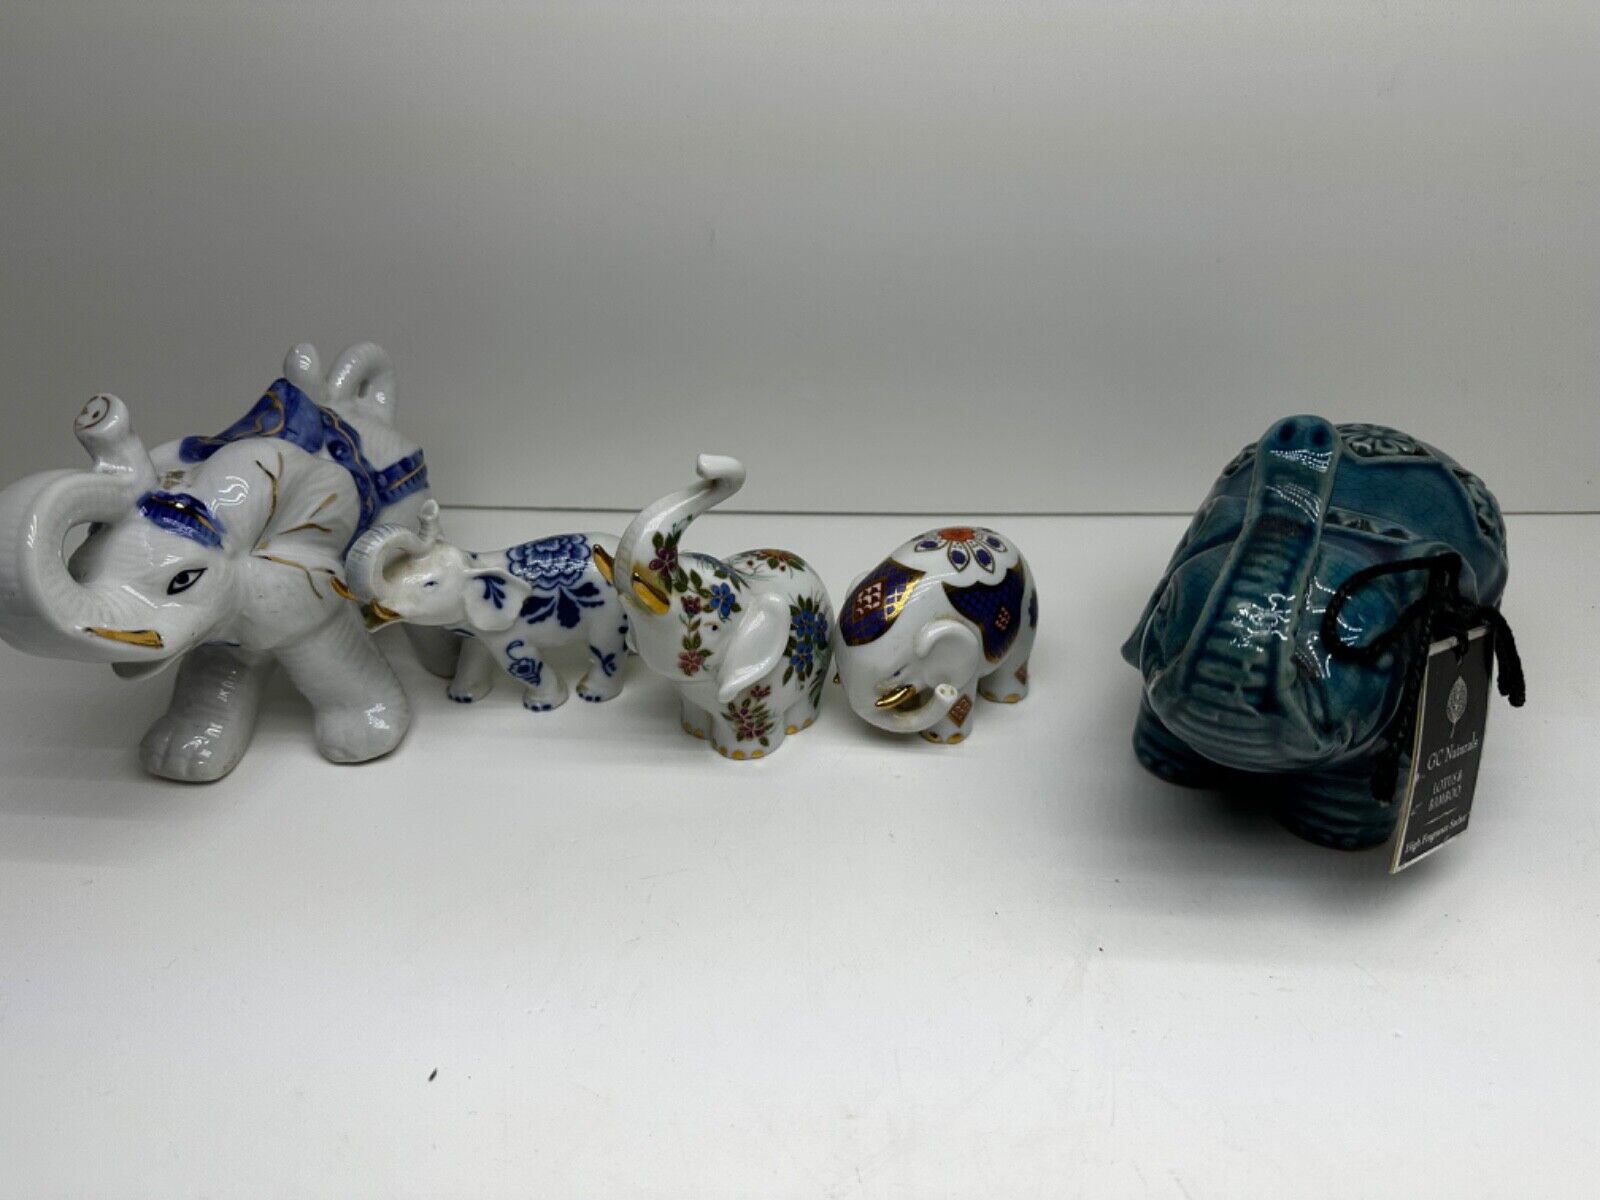 Vintage PG Handcrafted In Malaysia Porcelain Elephant Figurine Mint Condition